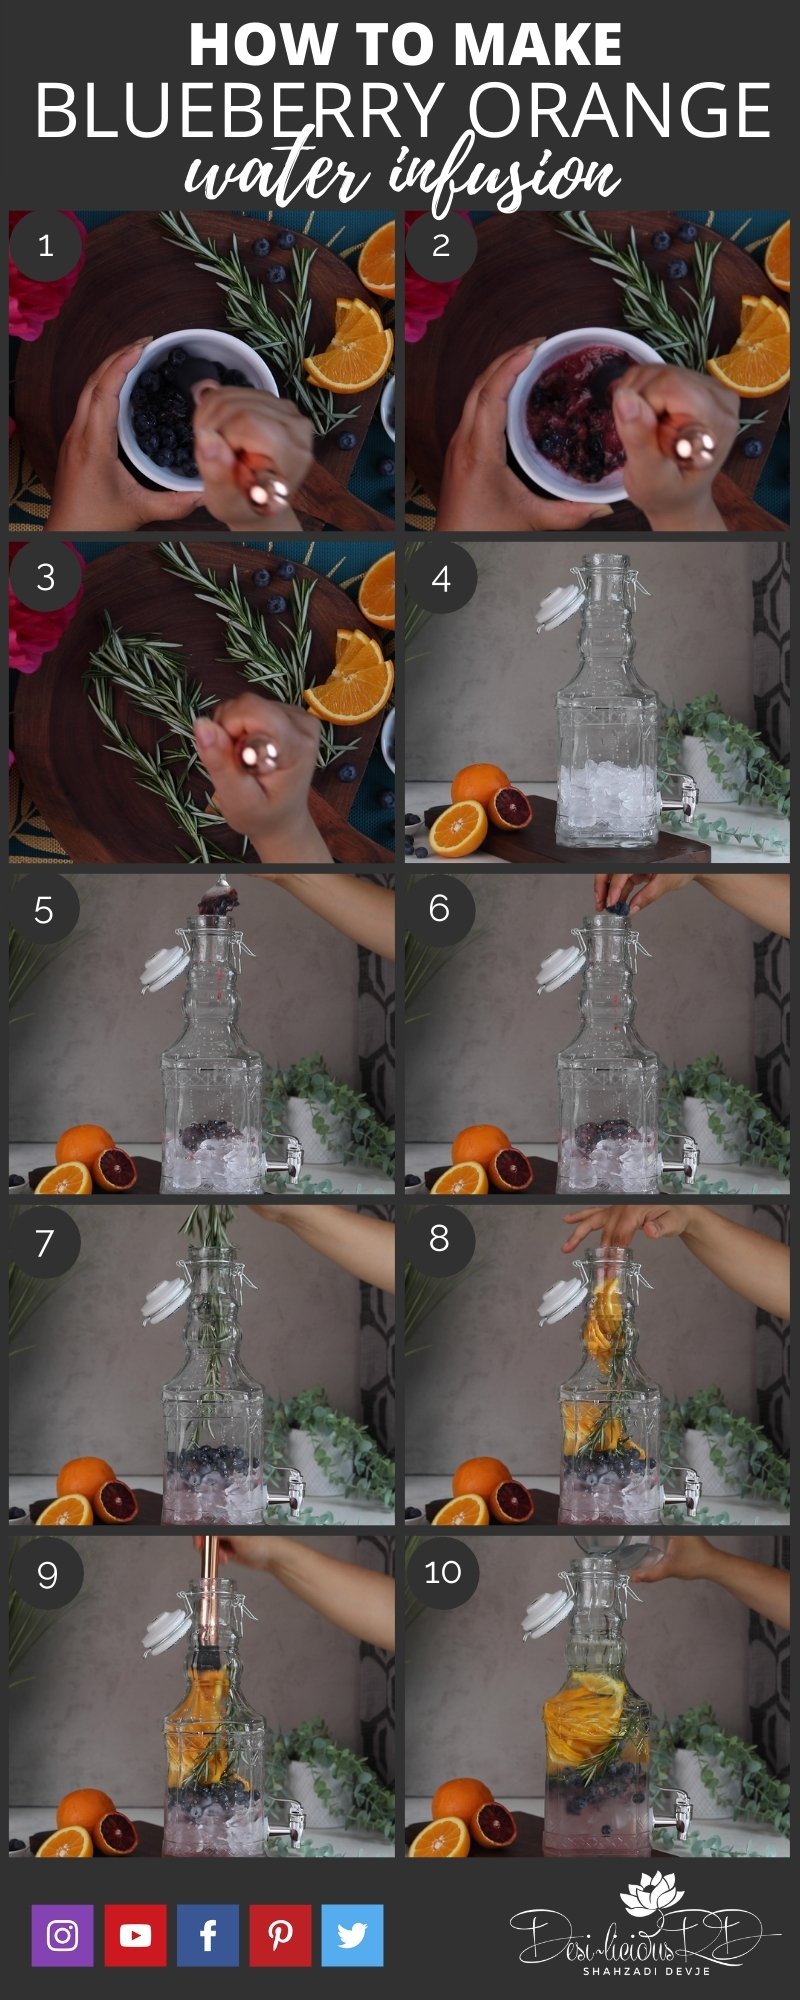 step by step preparation images of how to make blueberry orange water infusion in a pitcher with berries, orange slices, ice and sprigs of rosemary